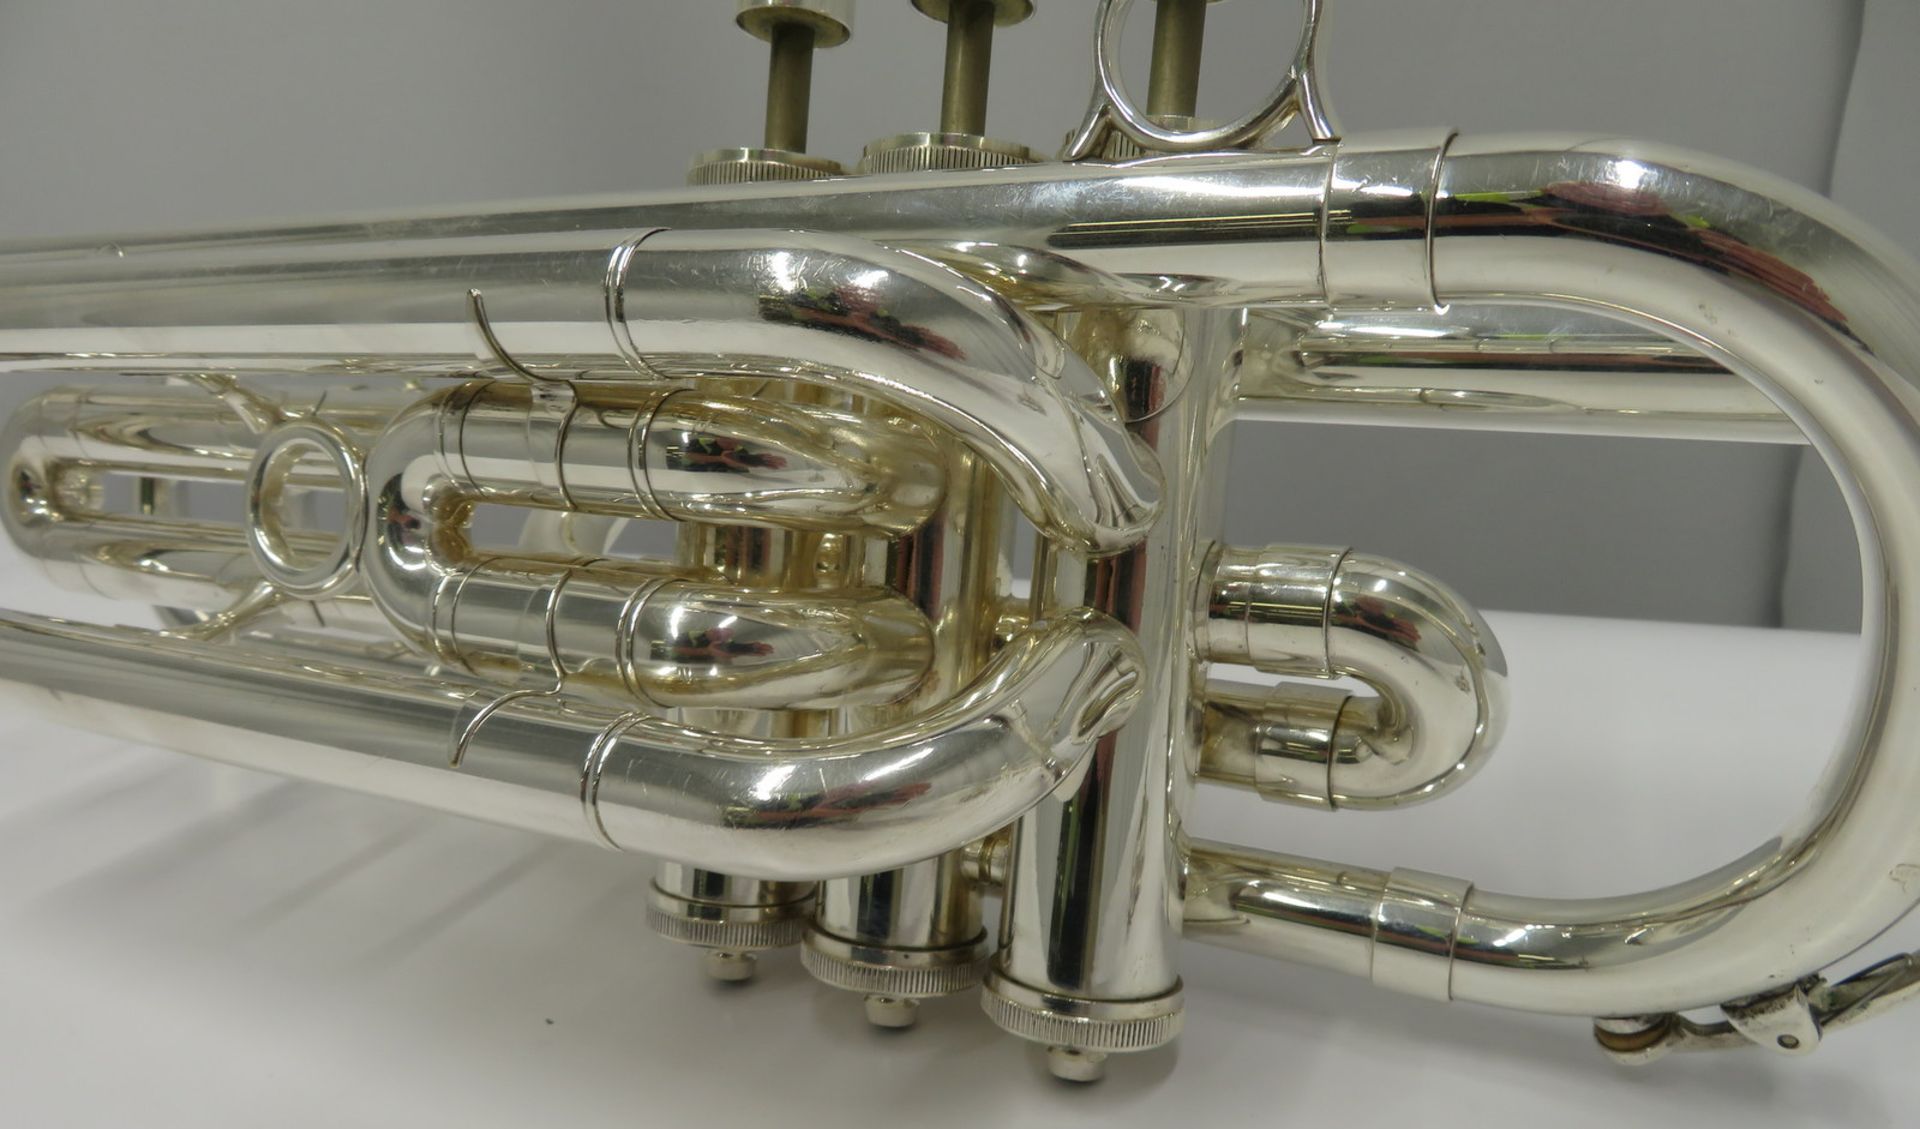 Besson International BE708 fanfare trumpet with case. Serial number: 887800. - Image 8 of 14